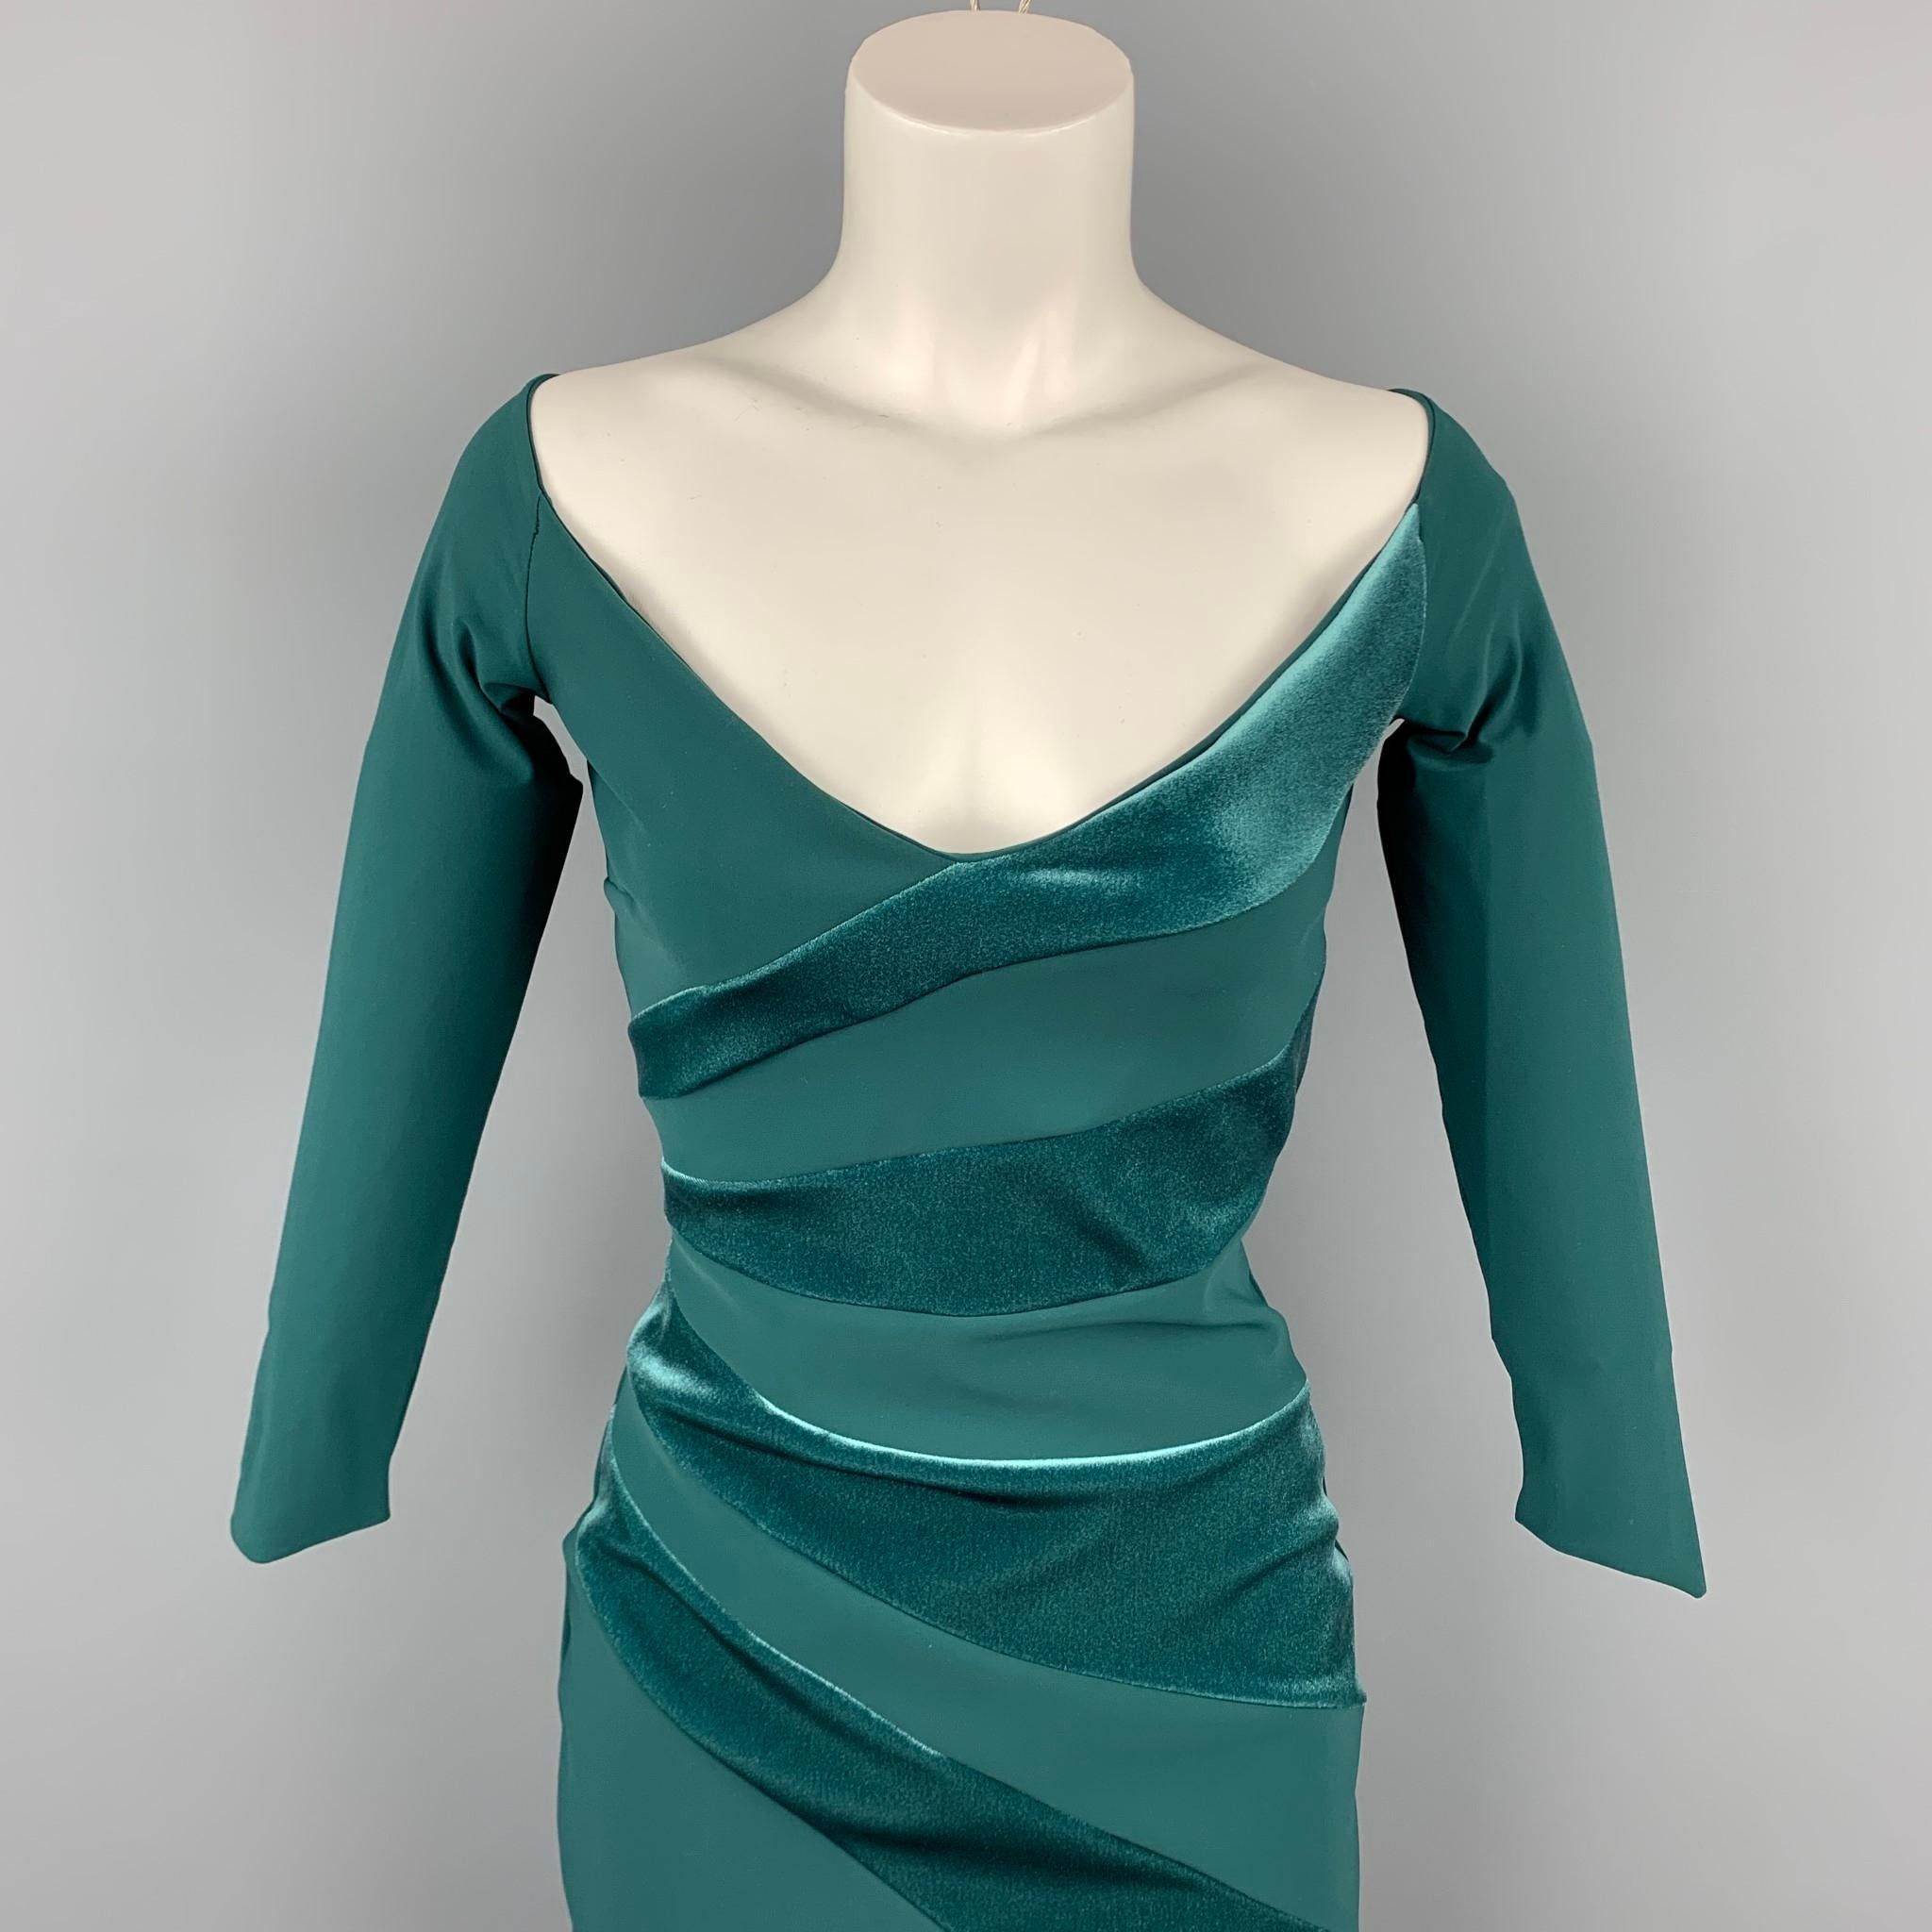 CHIARA BOIN dress comes in a green polyamide with velvet panels featuring 3/4 sleeves and a deep v-neck. Made in Italy.

Very Good Pre-Owned Condition.
Marked: IT 40
Original Retail Price: $269.00

Measurements:

Shoulder: 16.5 in.
Bust: 30